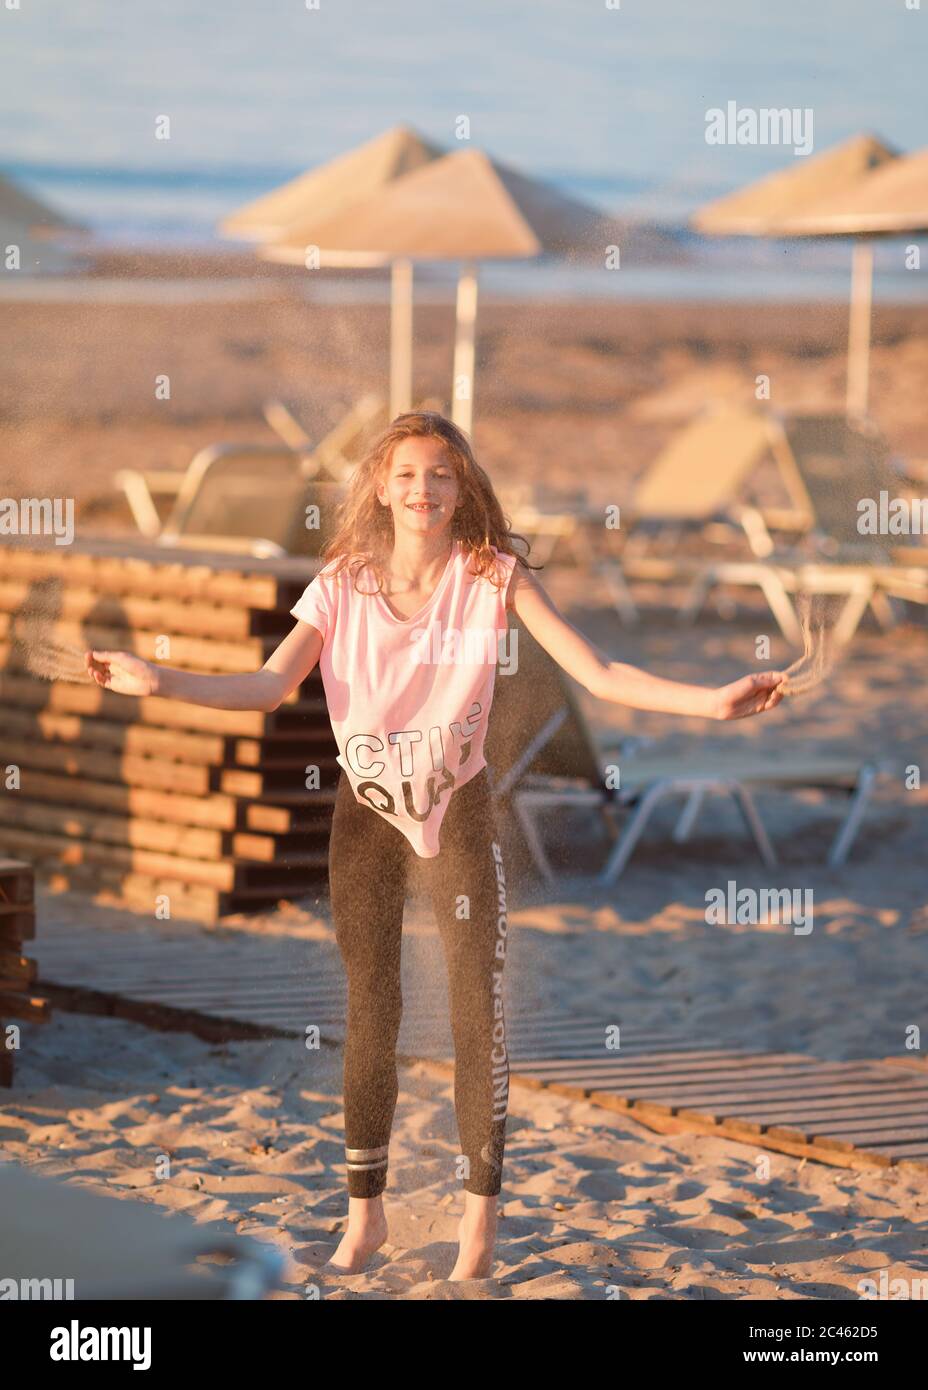 Young girl, tween age, wearing casual summer clothing, throwing sand in the air on the beach Stock Photo